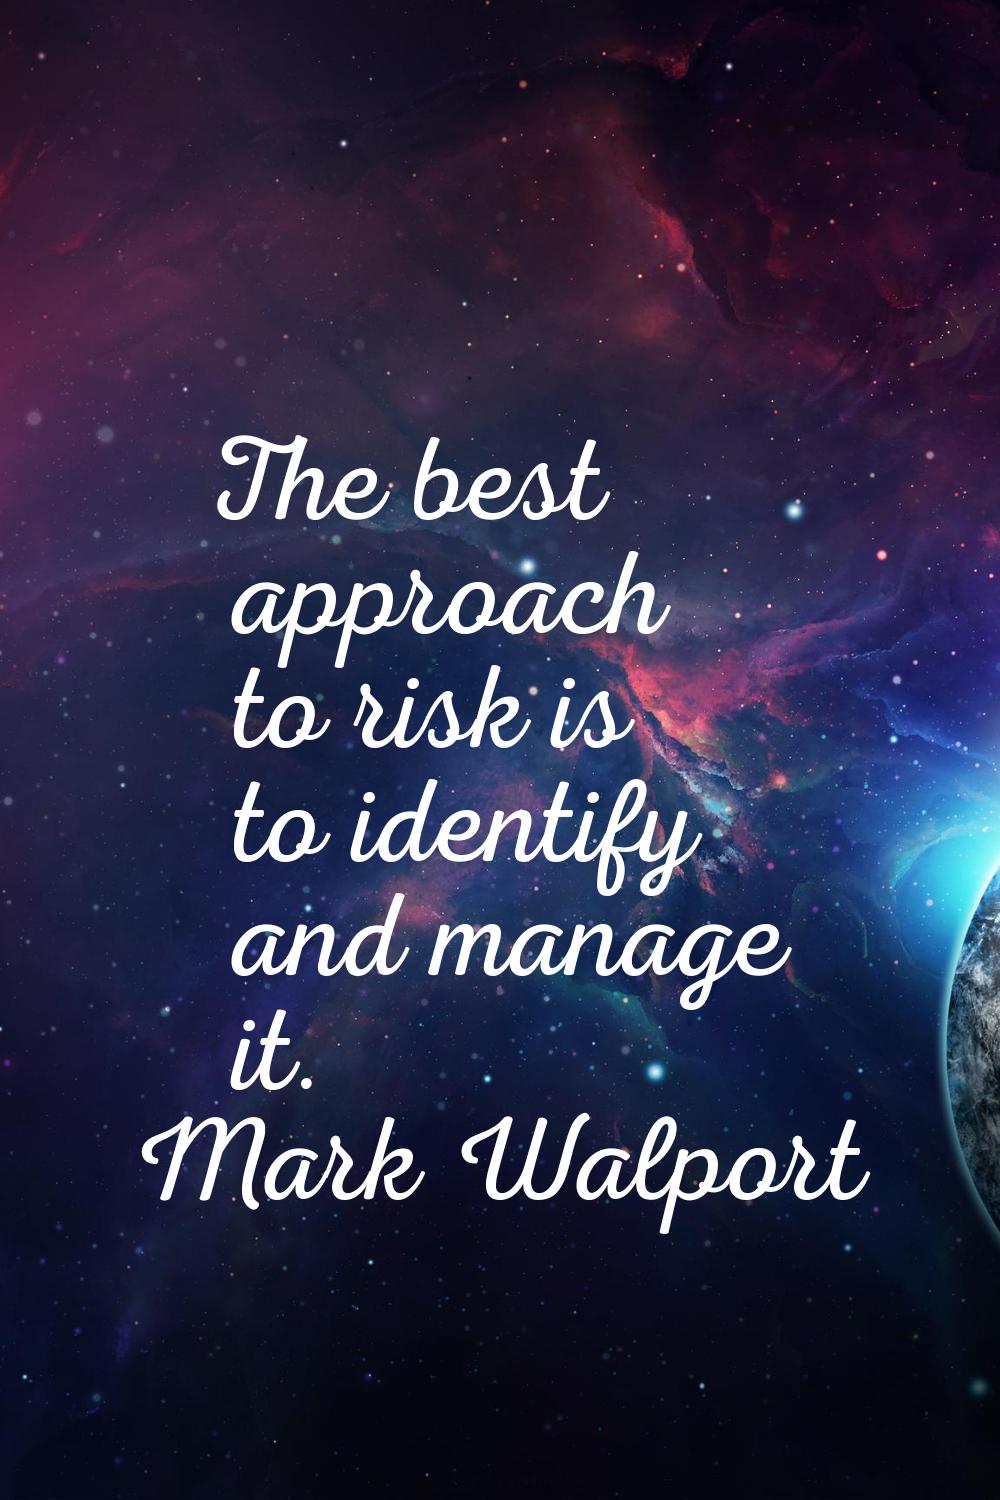 The best approach to risk is to identify and manage it.